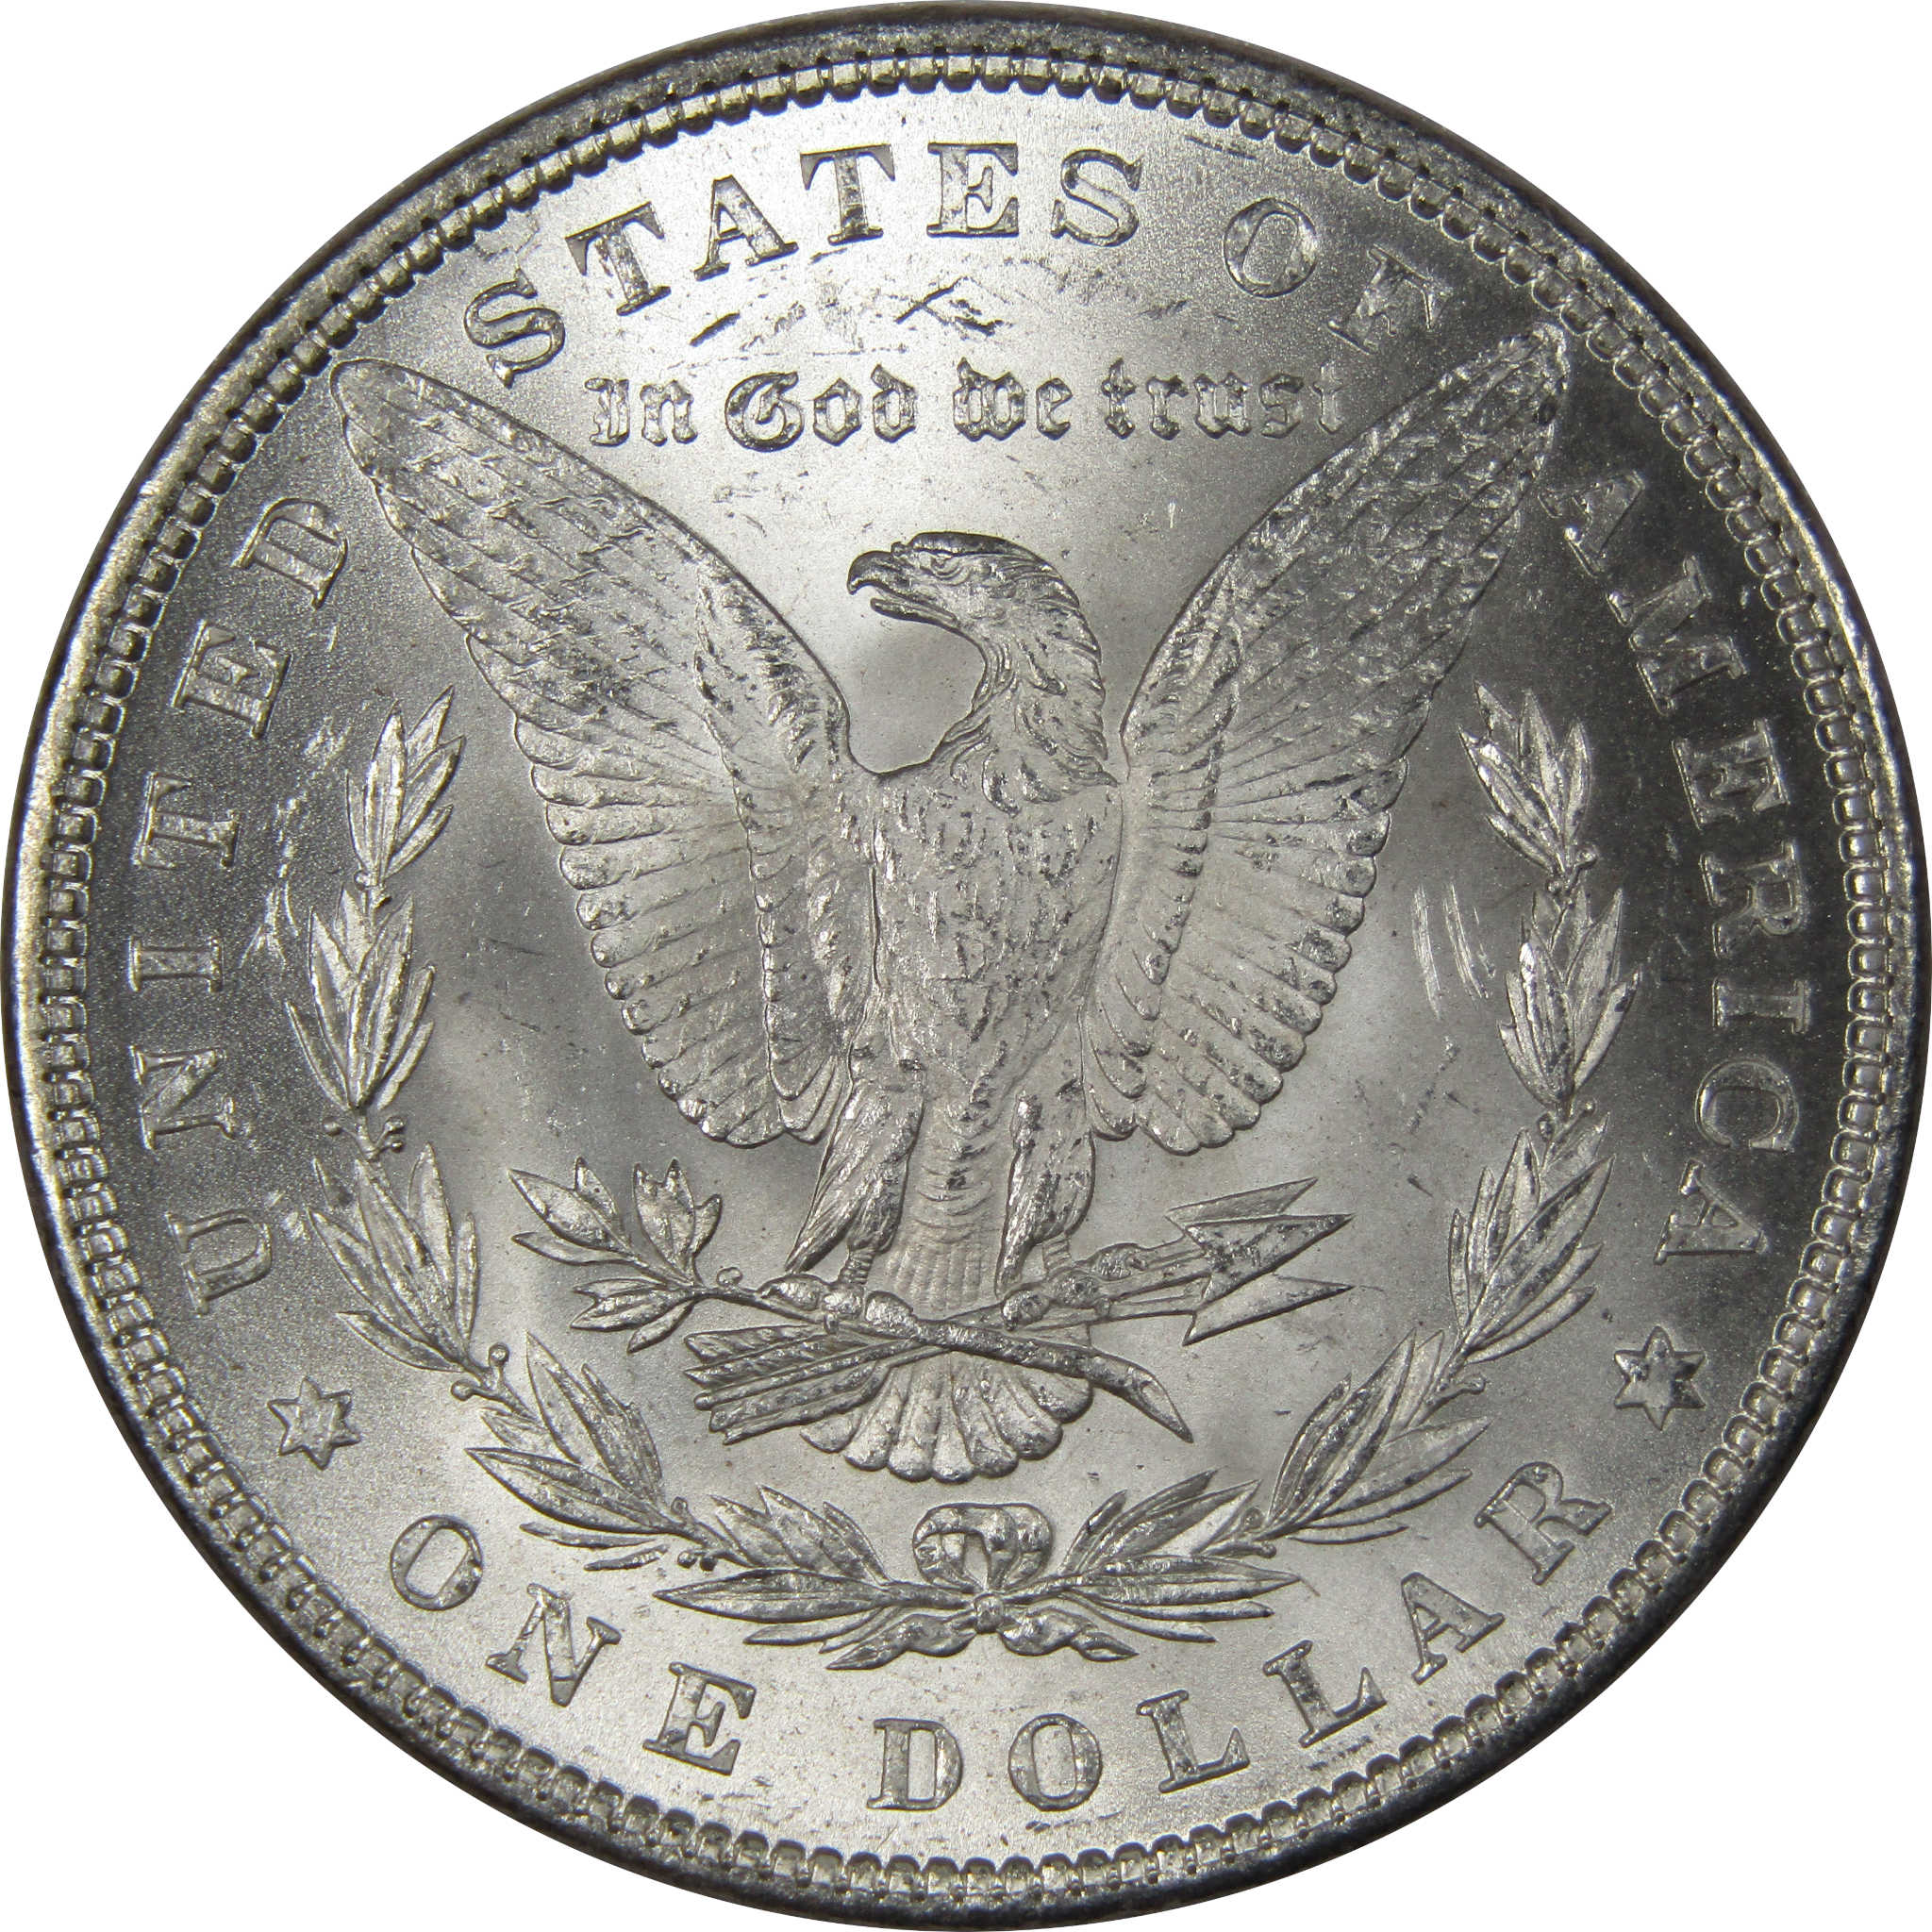 1882 Morgan Dollar BU Uncirculated Mint State 90% Silver SKU:IPC9660 - Morgan coin - Morgan silver dollar - Morgan silver dollar for sale - Profile Coins &amp; Collectibles